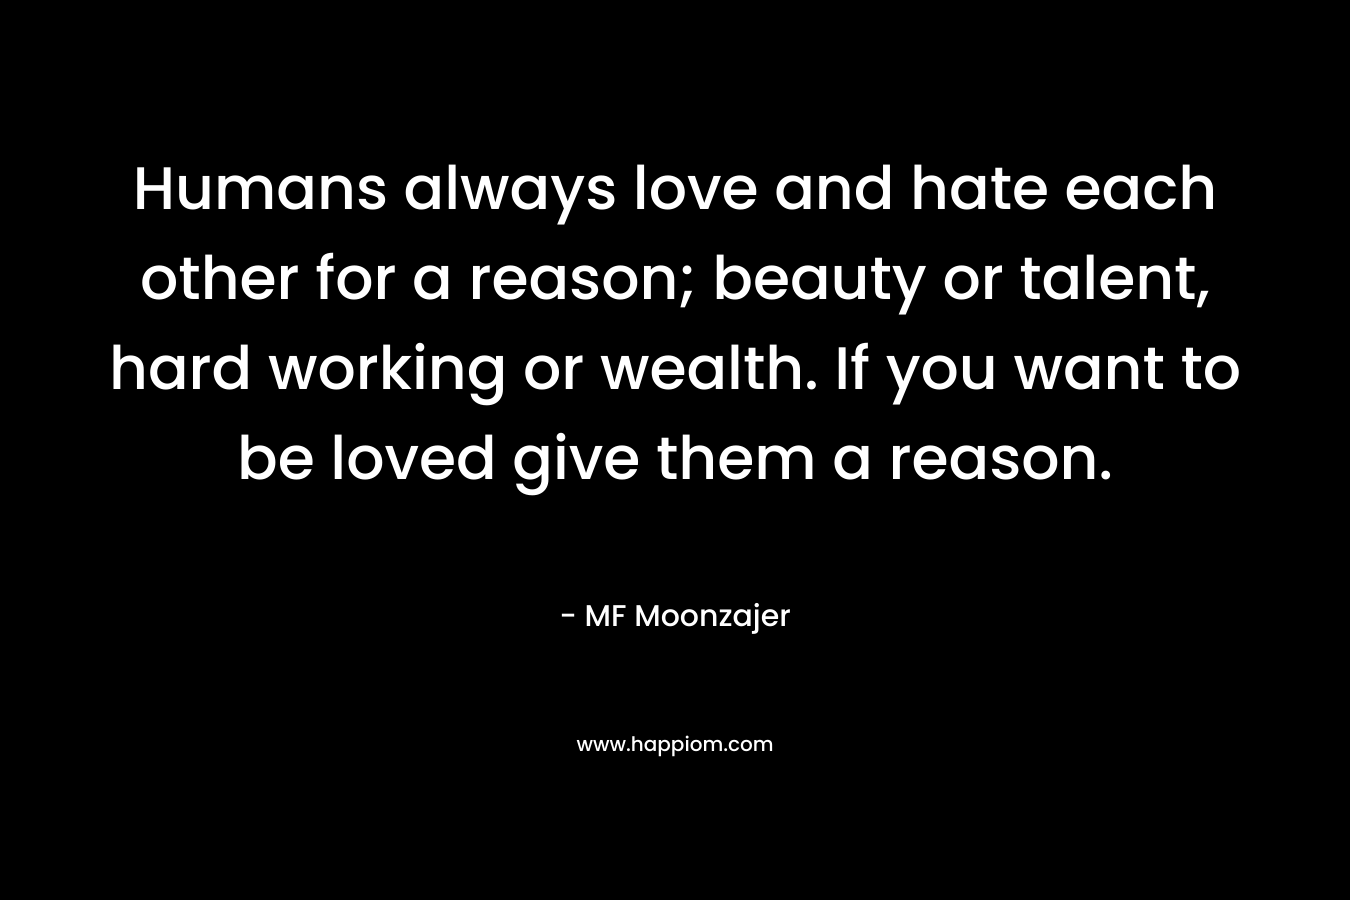 Humans always love and hate each other for a reason; beauty or talent, hard working or wealth. If you want to be loved give them a reason.